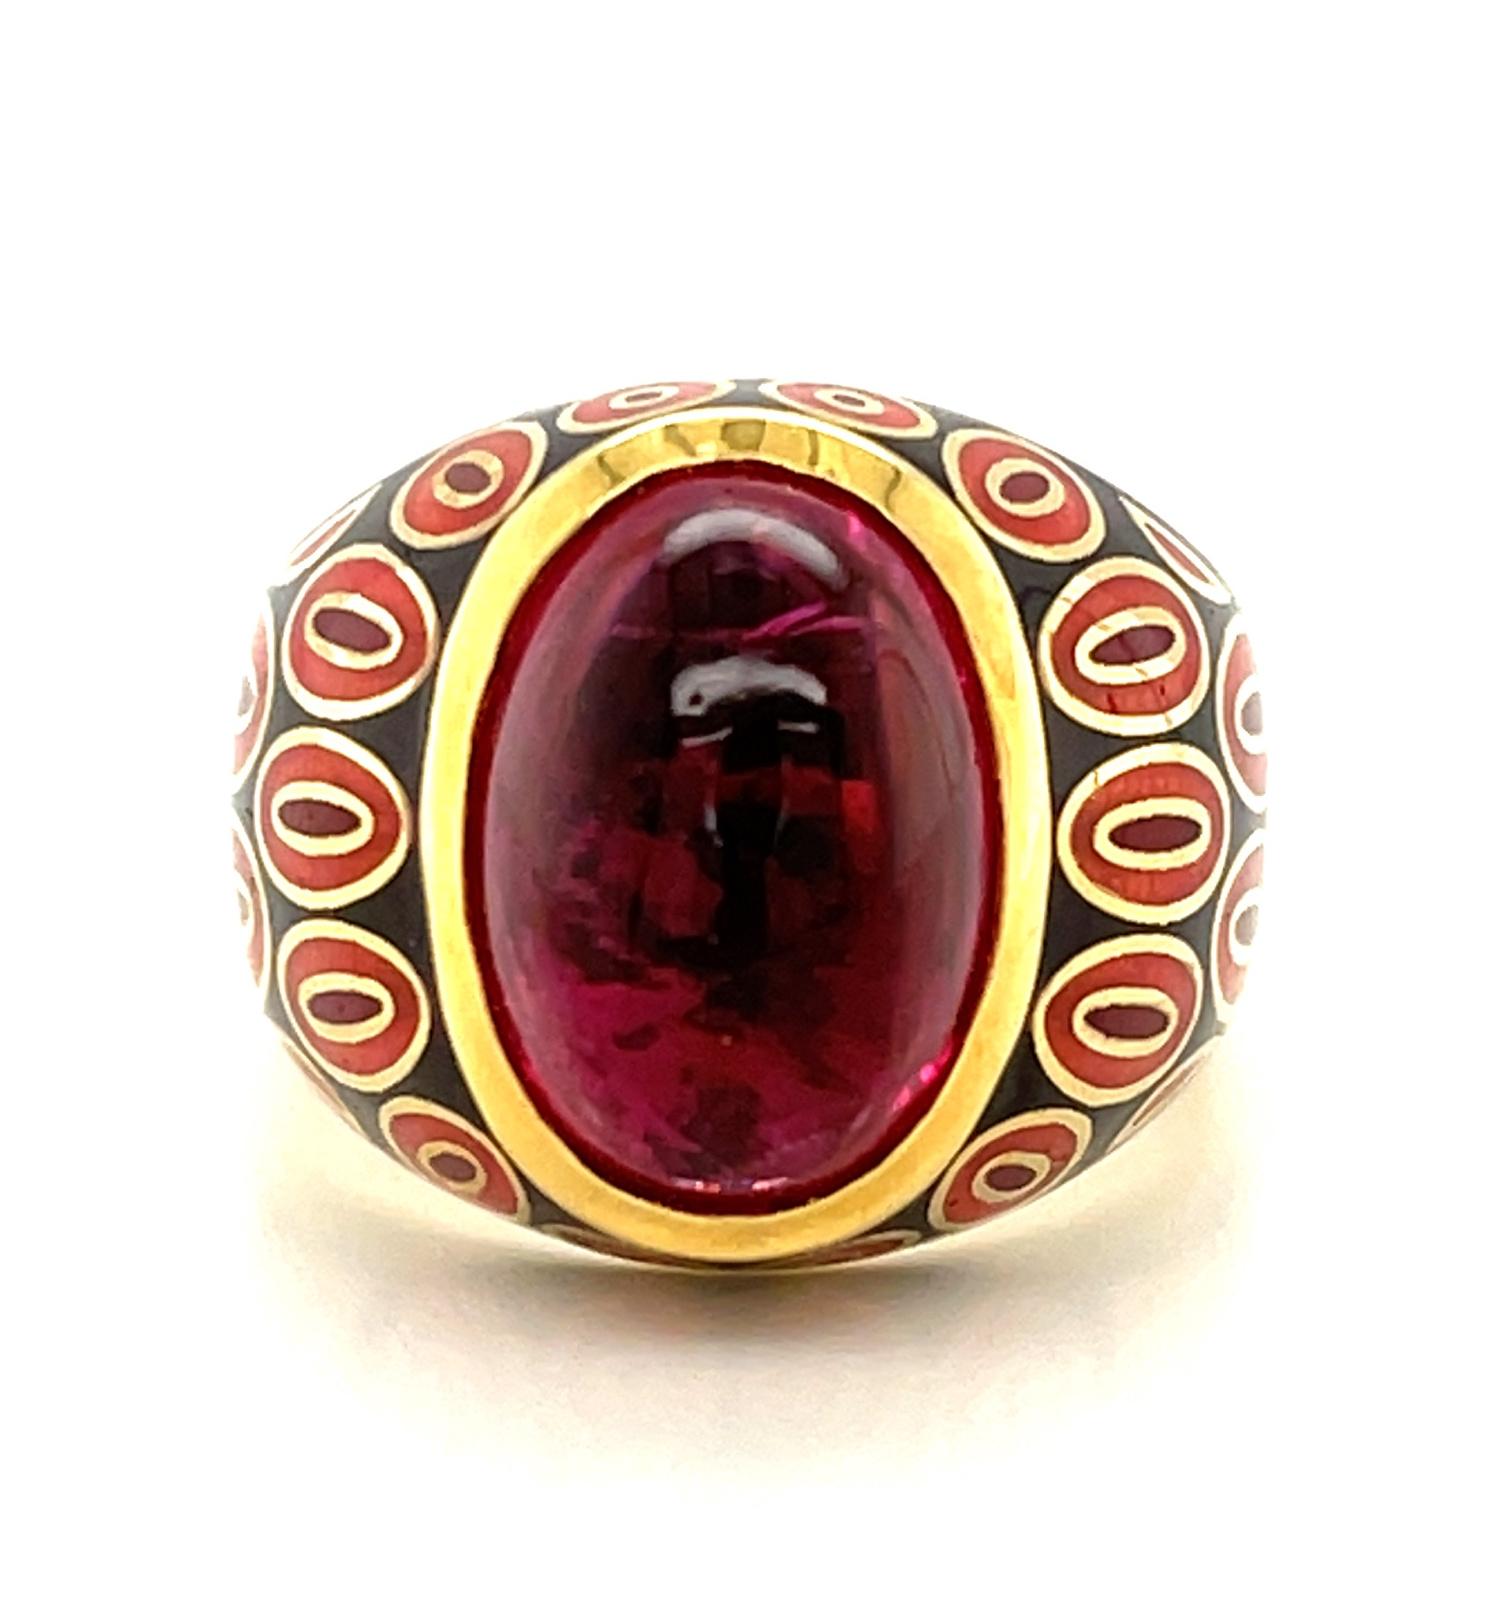 A fine quality, rich fuchsia-red rubellite tourmaline cabochon is featured in this 18k and enamel ring. This ring is serious and tailored with a funky spirit! The bold color and pattern combination of enameling complement the shape and the depth of